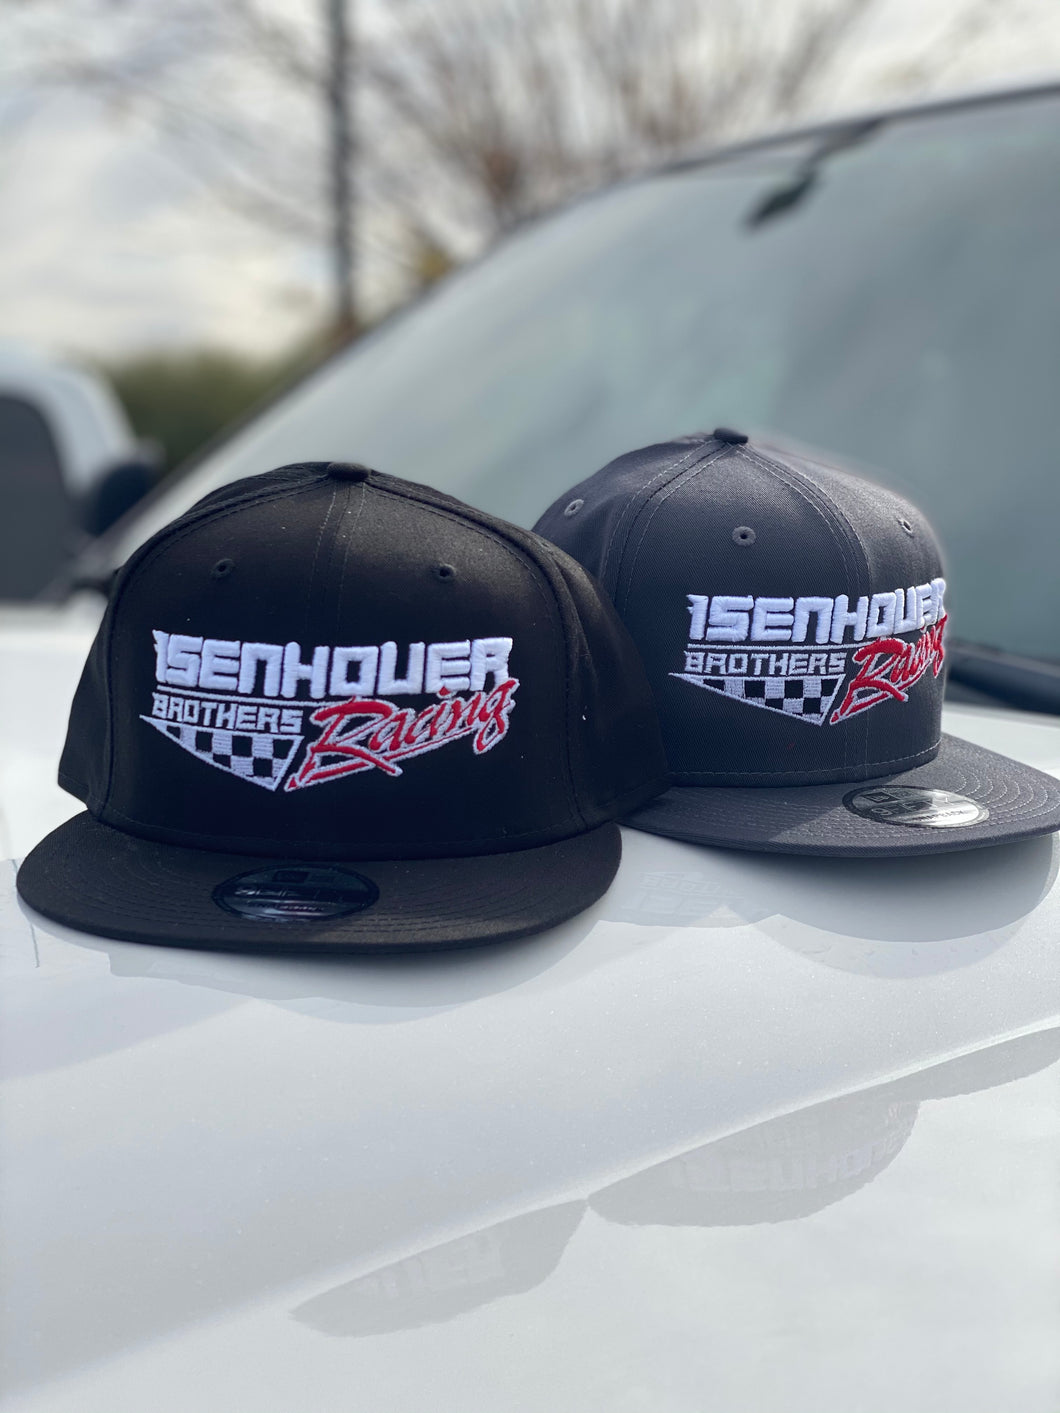 Isenhouer Brothers Racing Classic Logo Hat - Snap Back